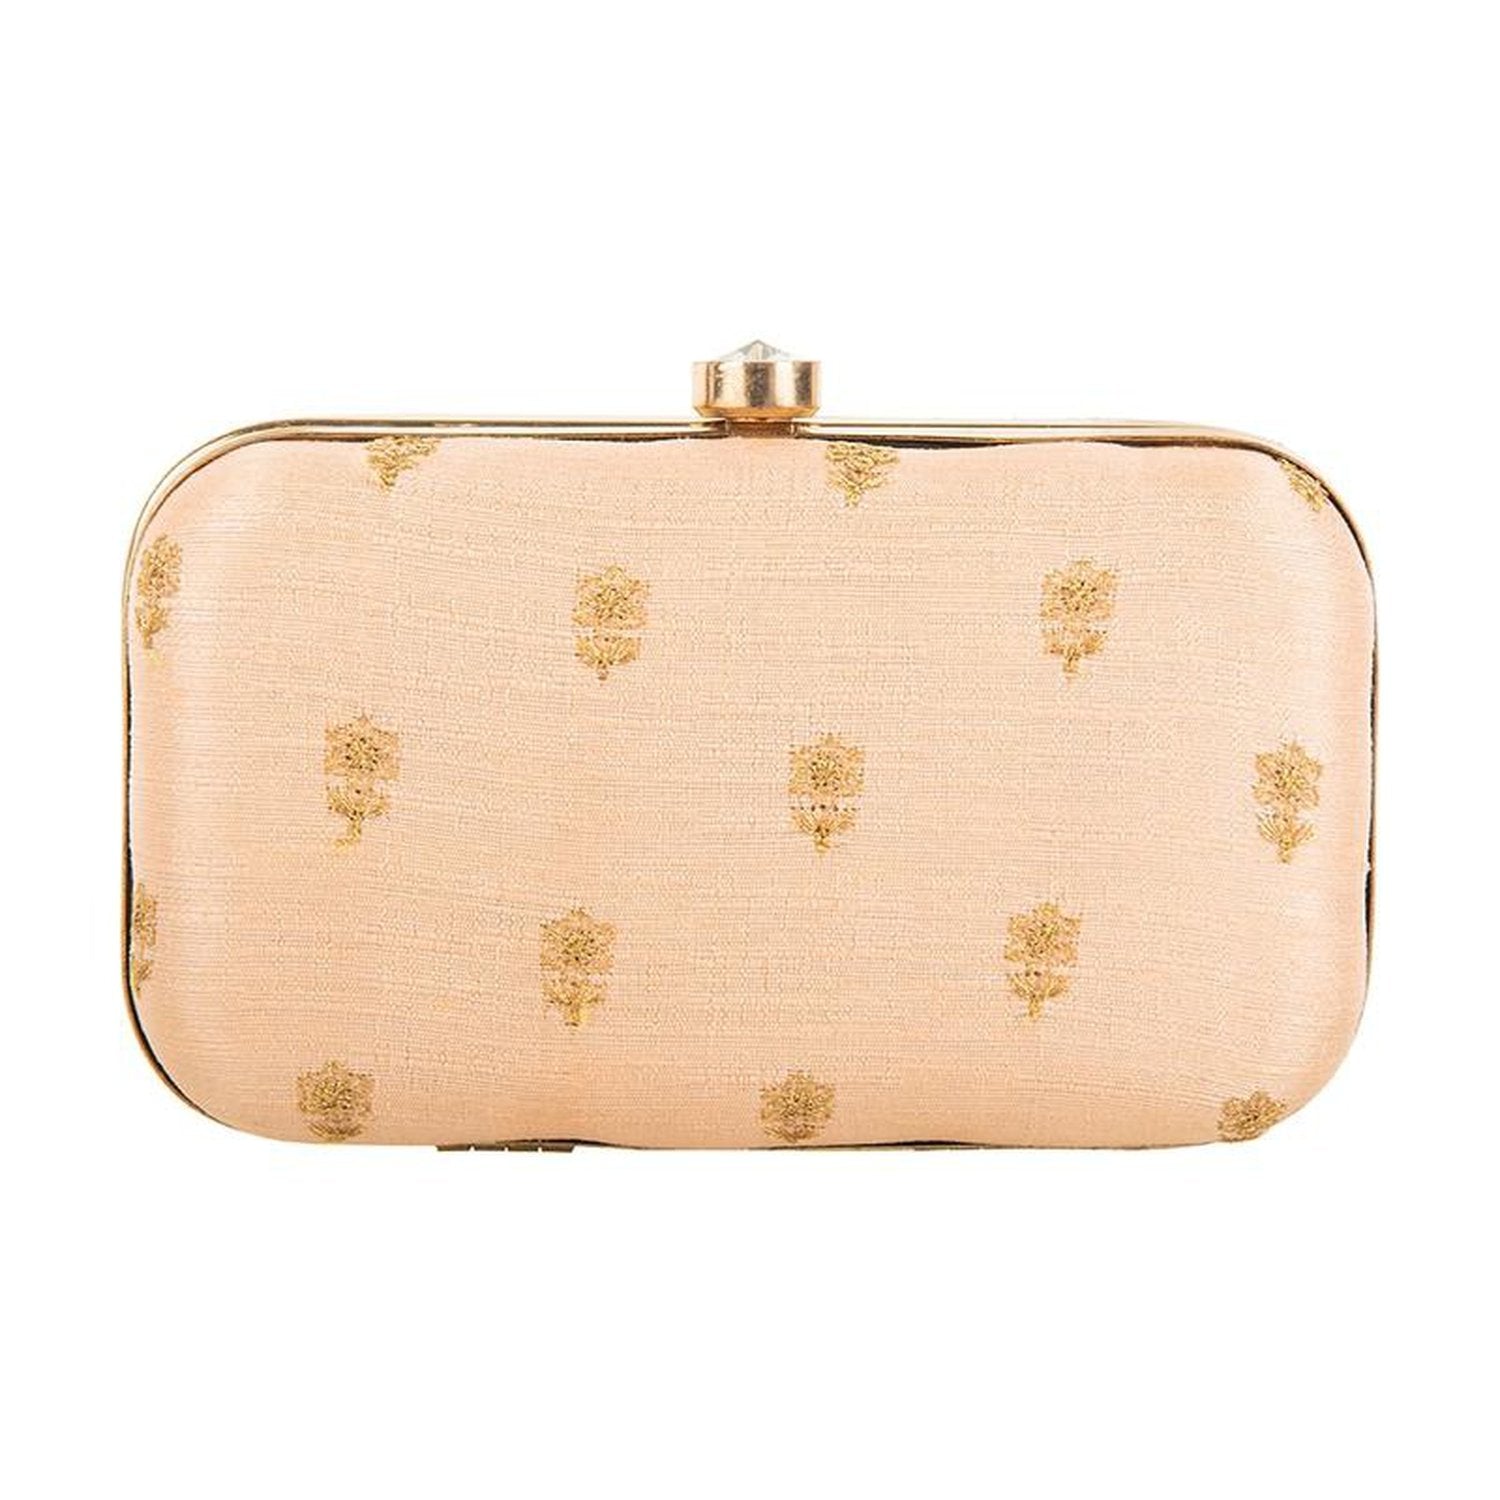 kate spade new york accessories Happily Ever After Clutch | Kate spade  wedding, Kate spade clutch, Clutch bag wedding